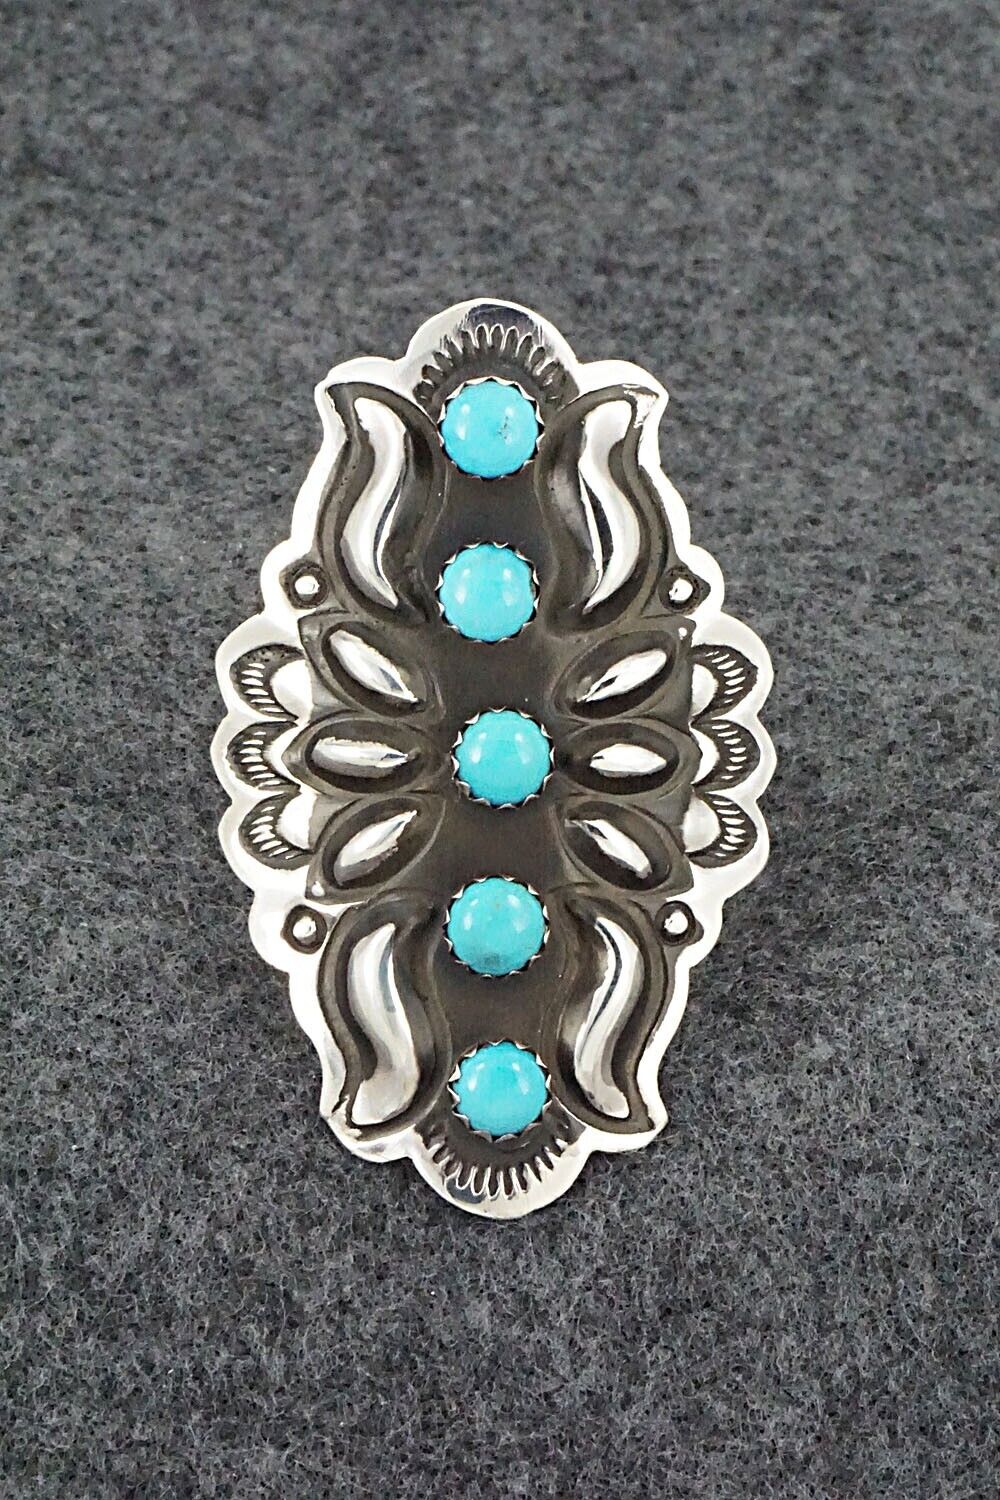 Turquoise & Sterling Silver Ring - Leander Tahe - Size 9.5